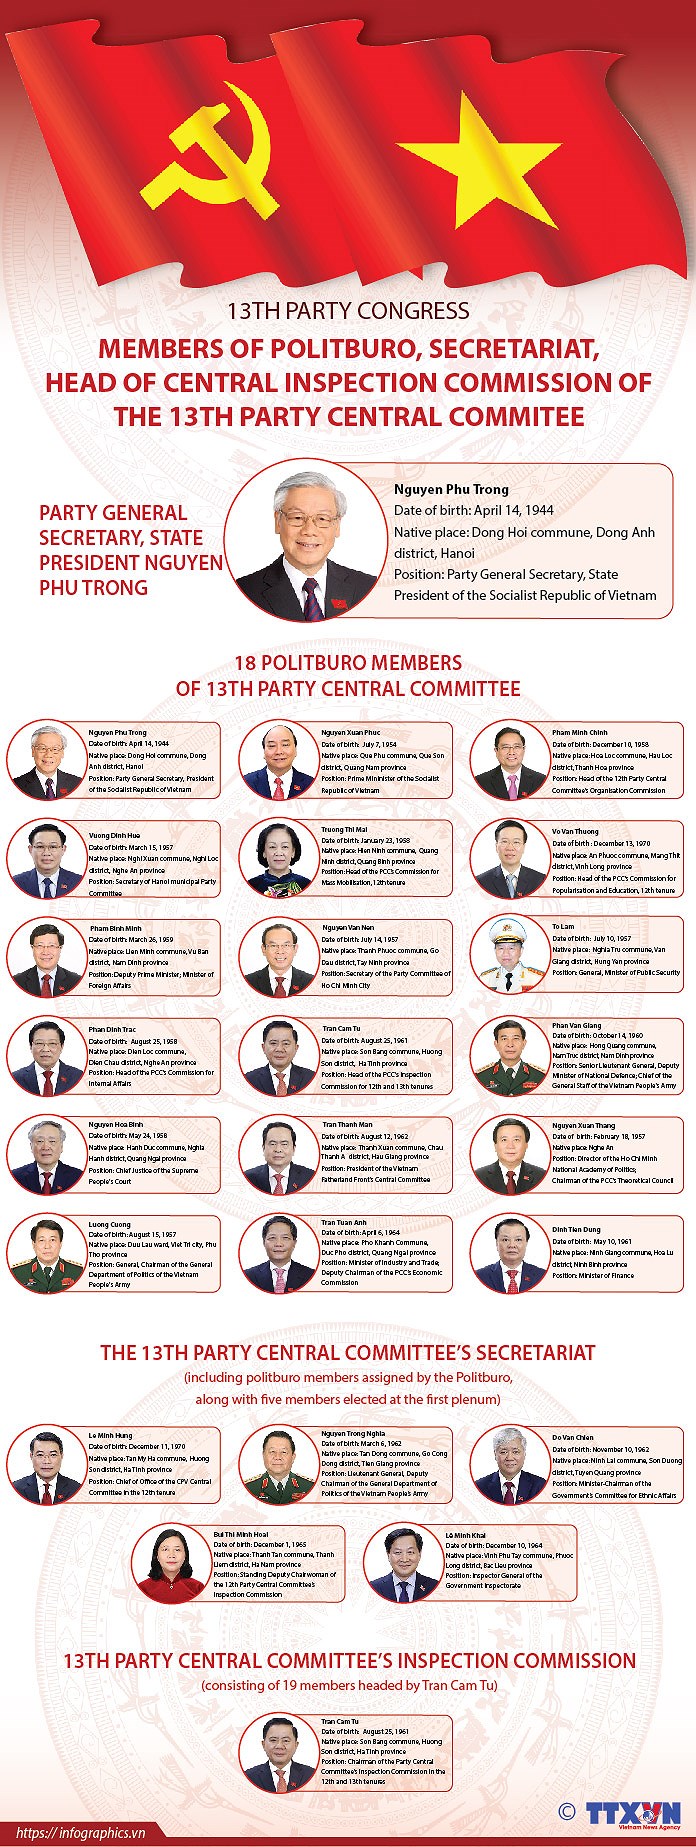 Members of Politburo, Secretariat, Head of Central Inspection Commission of 13th PCC hinh anh 1